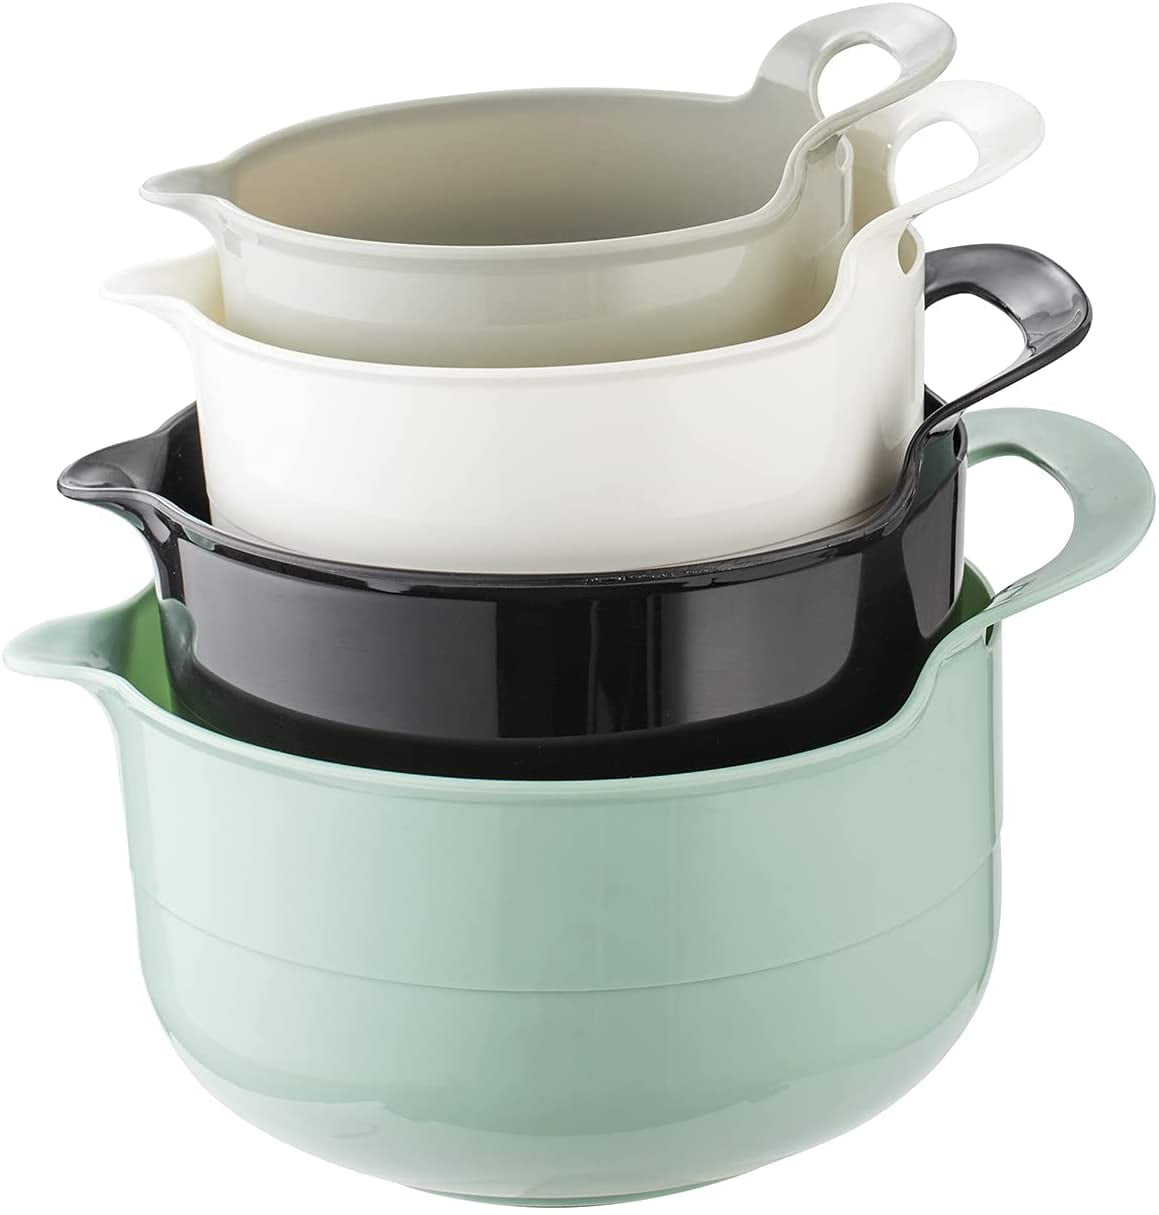 Cook with Color 4 Piece Nesting Plastic Mixing Bowl Set with Pour Spouts and Handles, Mint, Green